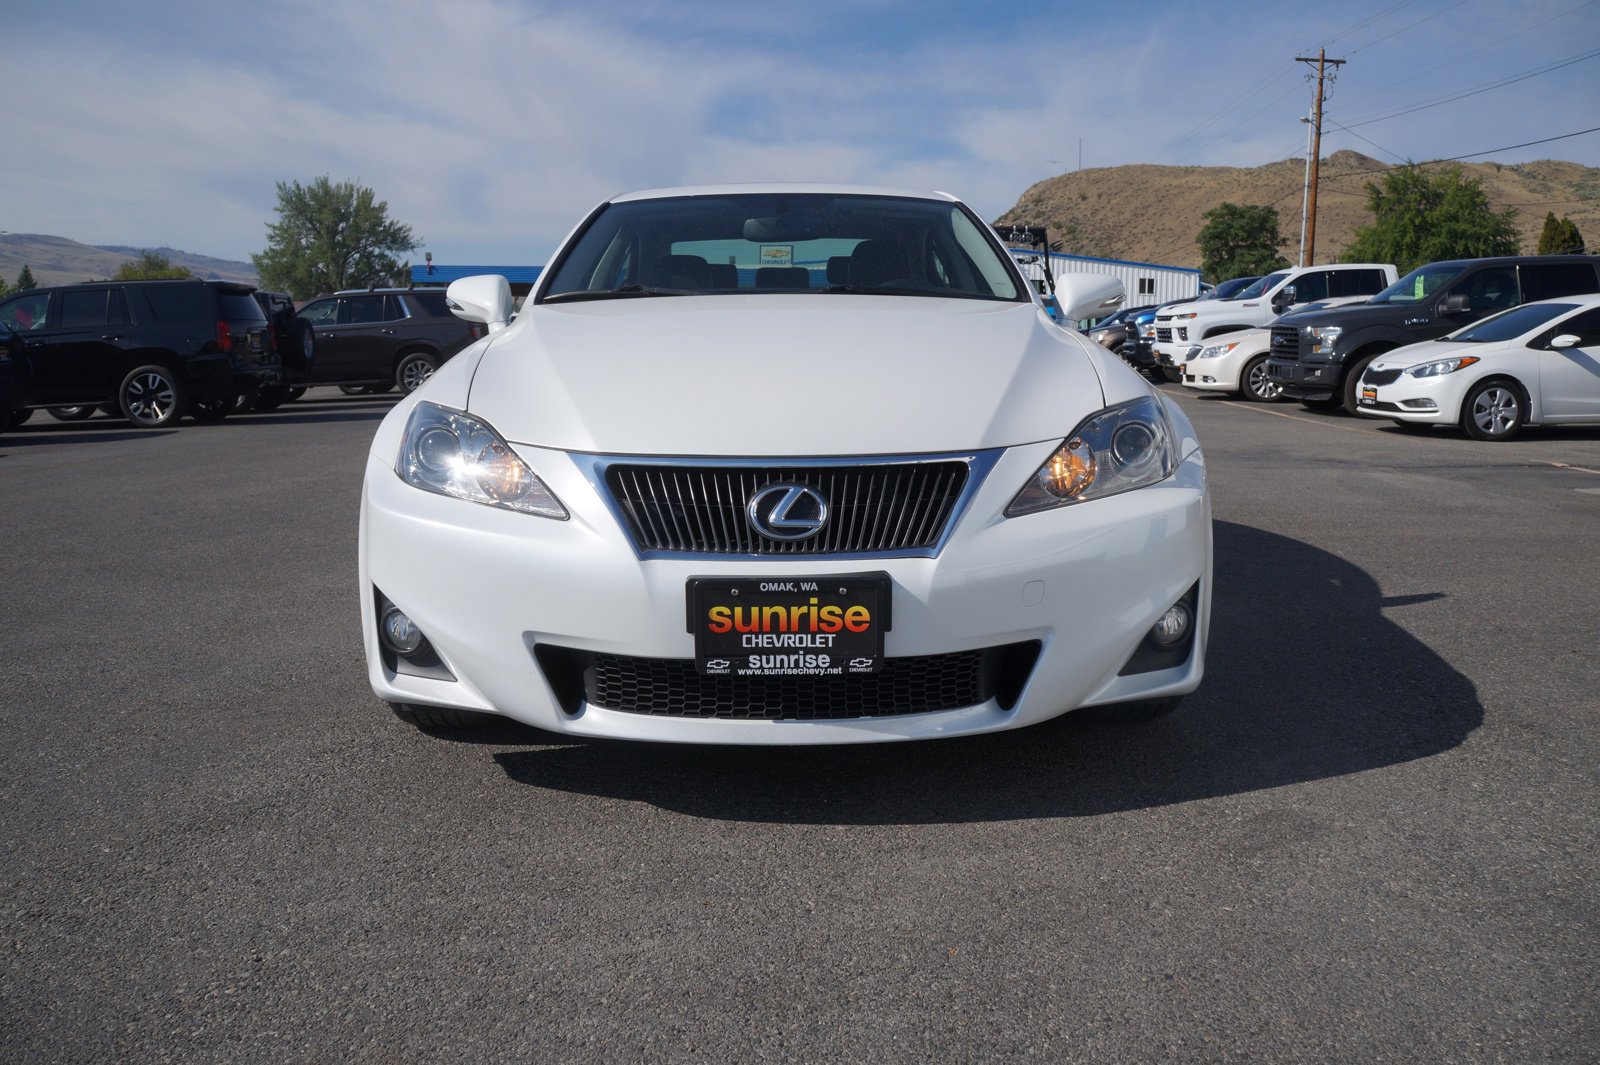 Used 2012 Lexus IS 250 with VIN JTHCF5C27C5057324 for sale in Omak, WA